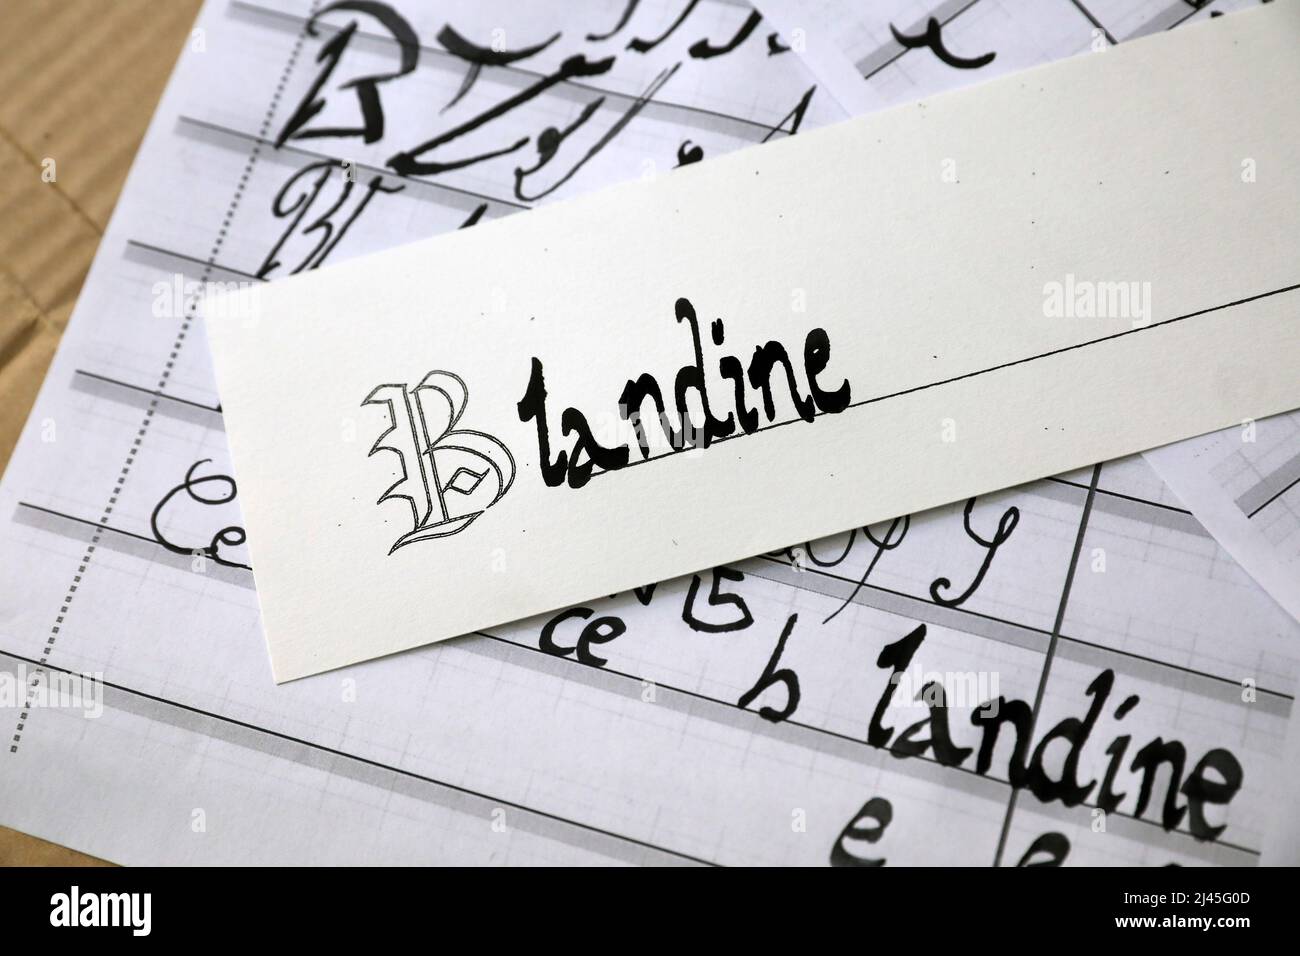 Writing exercise, calligraphy. First name Blandine written with black ink Stock Photo